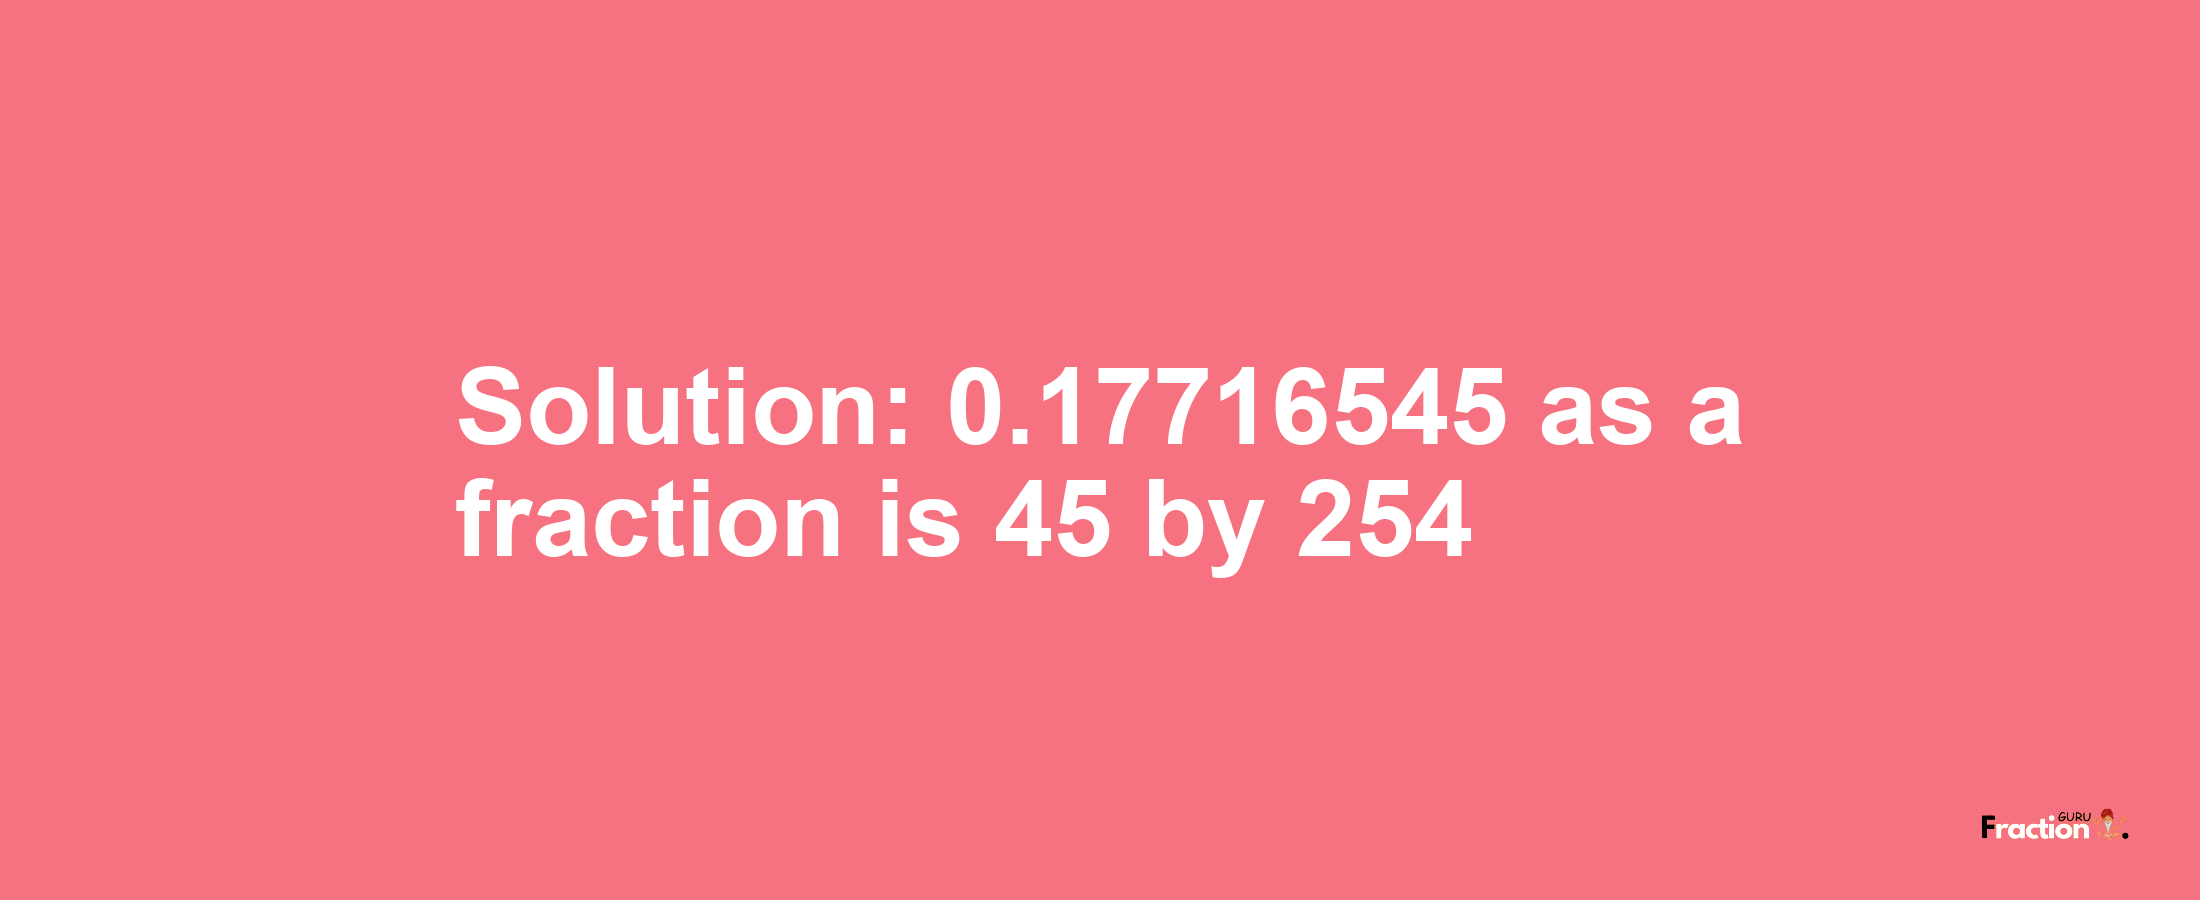 Solution:0.17716545 as a fraction is 45/254